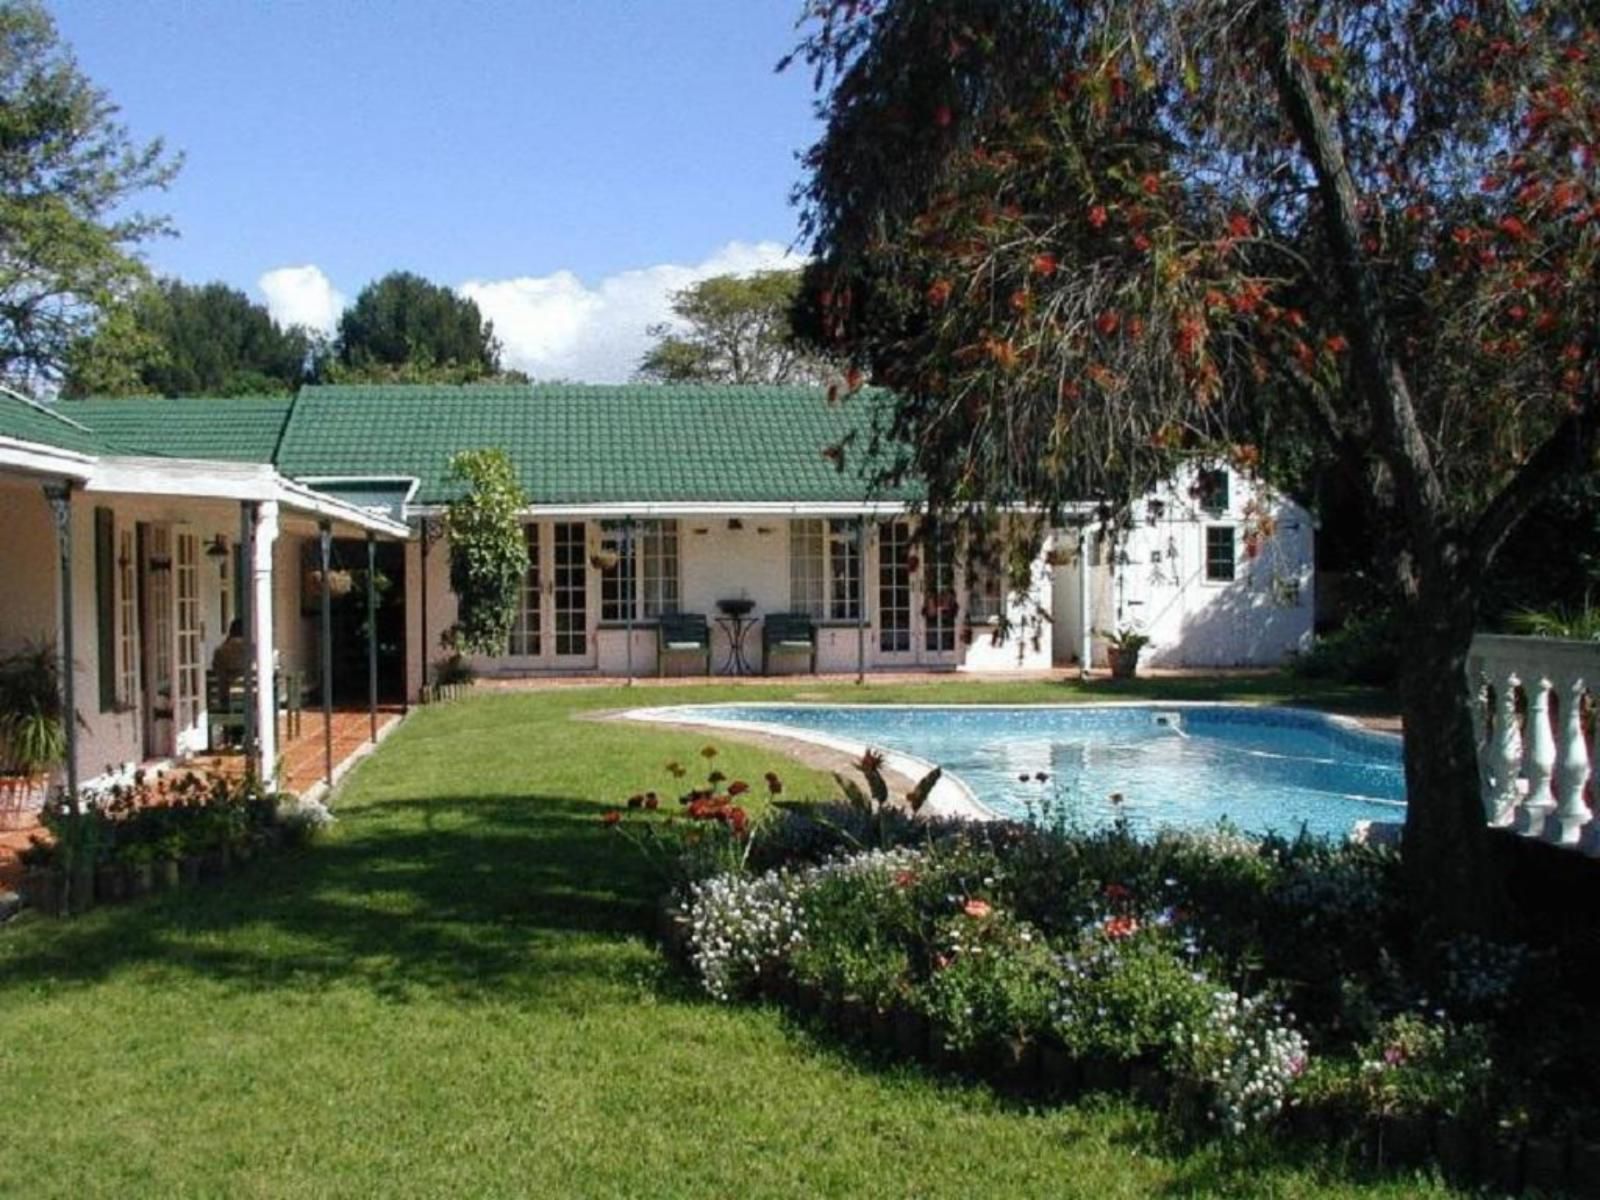 Somer Place B And B Somerset West Western Cape South Africa House, Building, Architecture, Swimming Pool